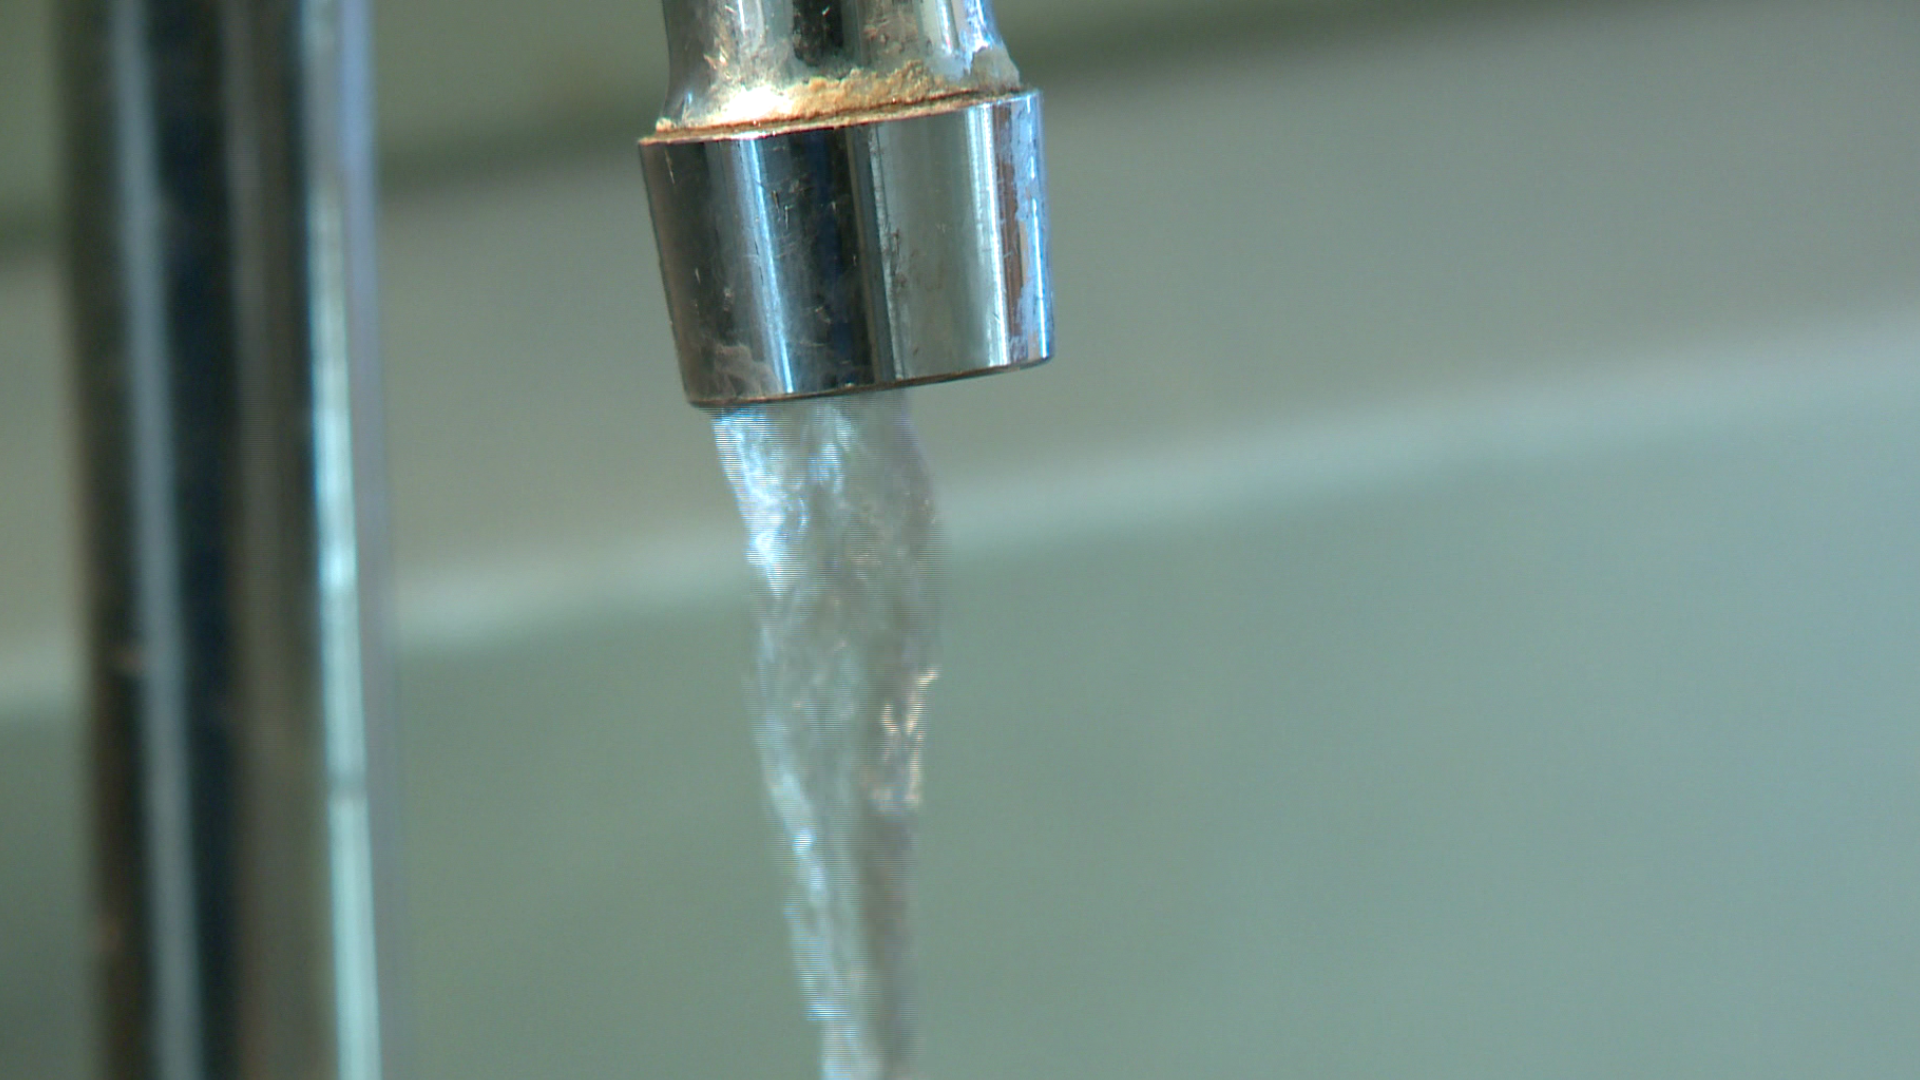 The Town of Berwick Water Department has asked consumers to boil all water for one minute before use until further notice.